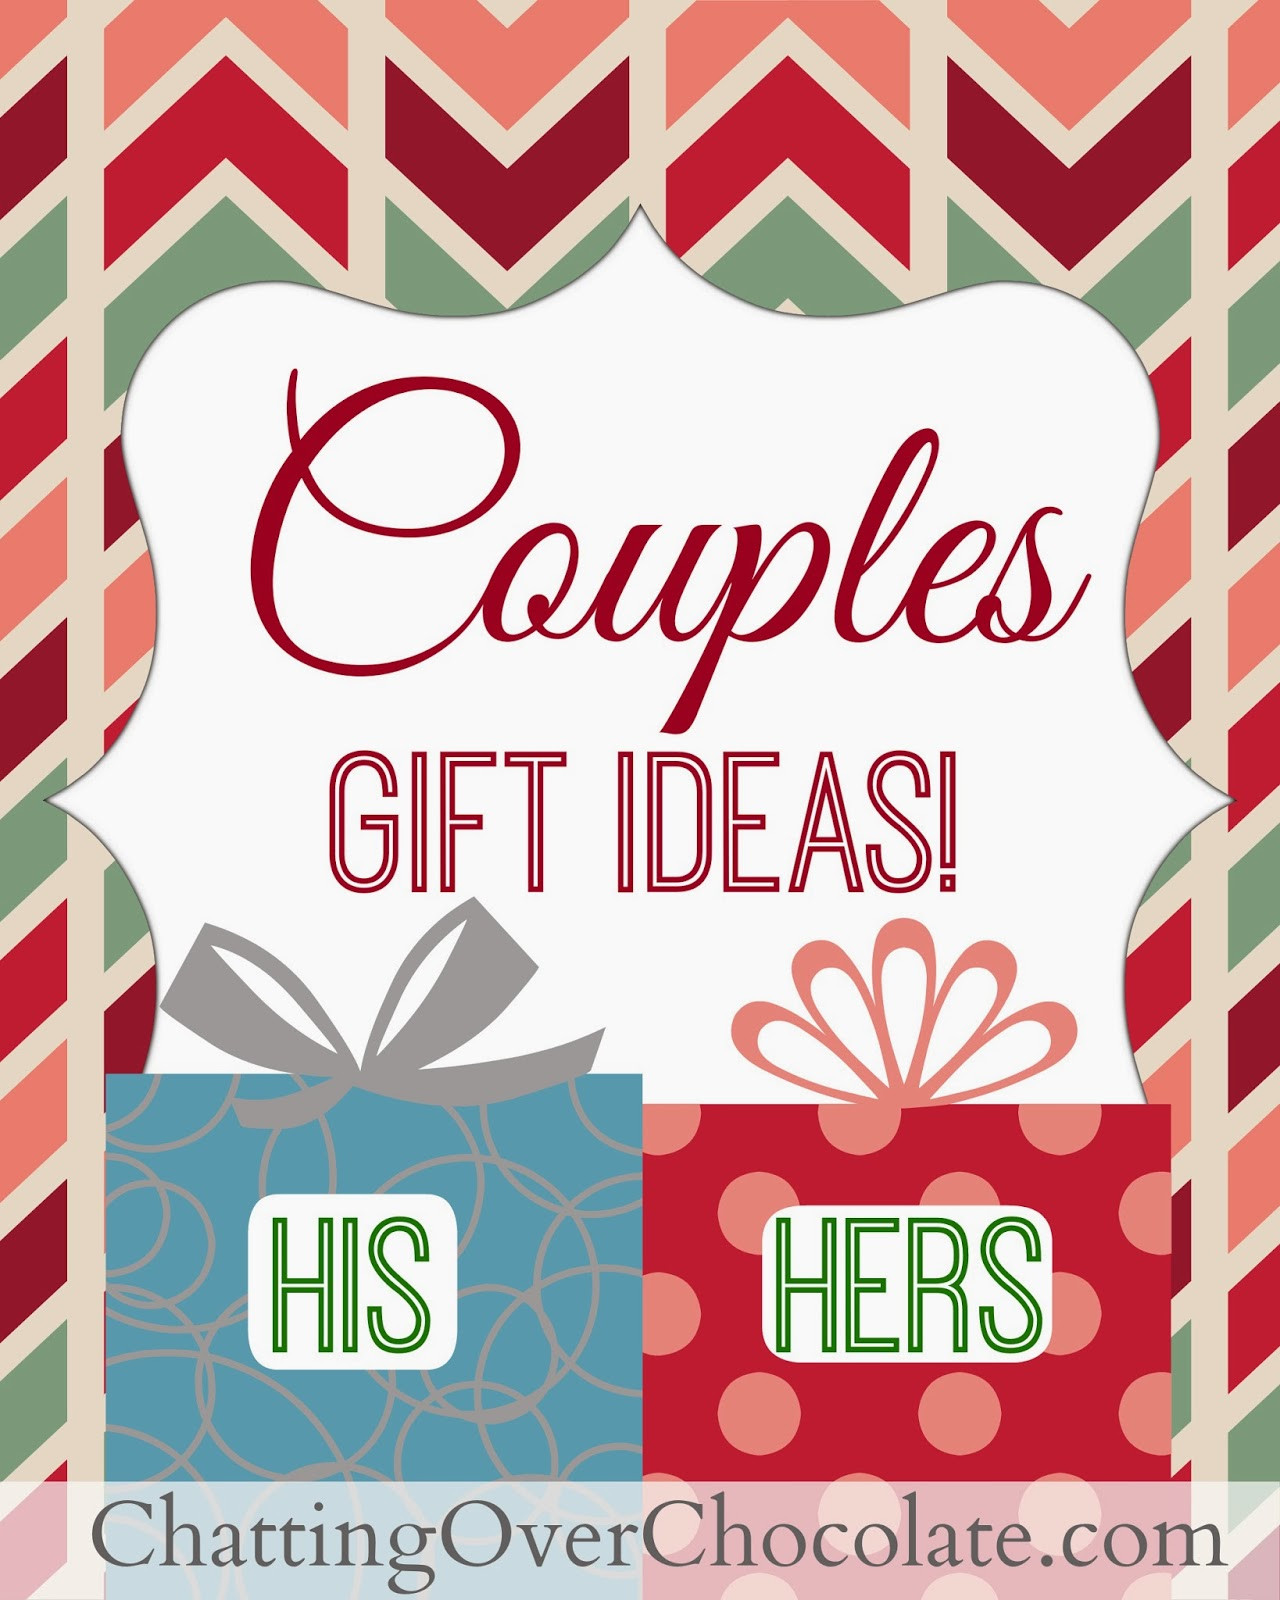 Couple Gift Ideas For Christmas
 Chatting Over Chocolate His & Hers Gift Ideas Couples